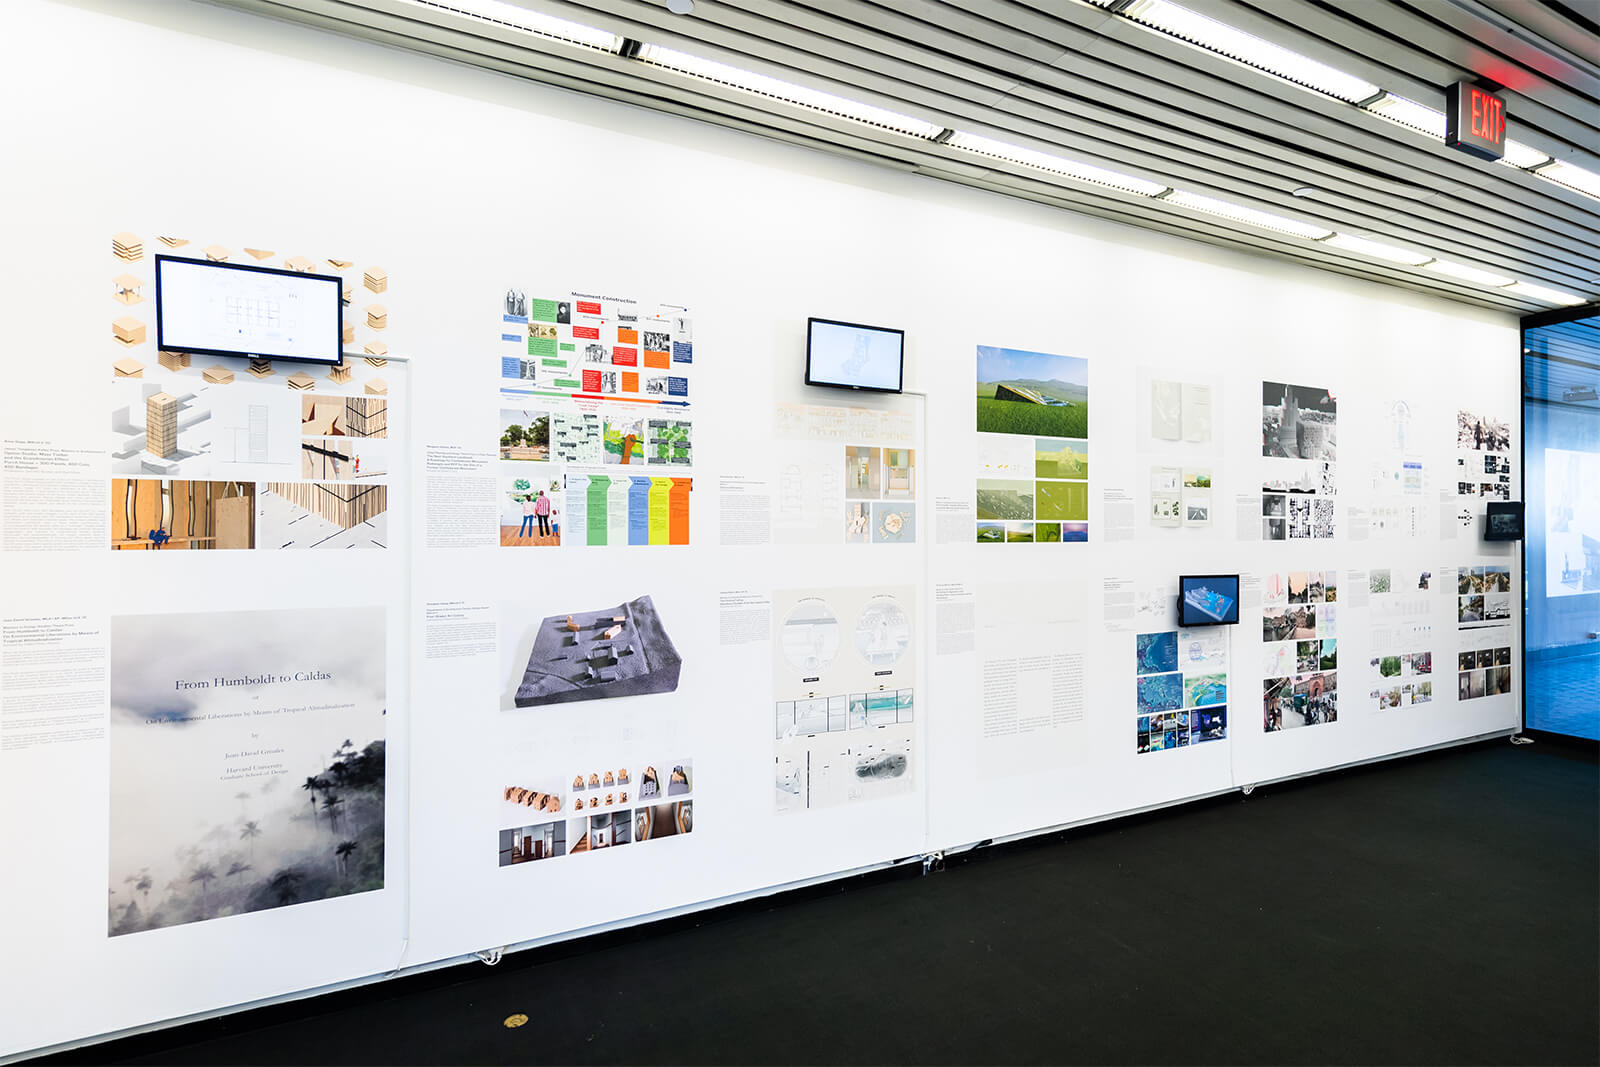 Exhibition wall with drawings and multimedia screens.